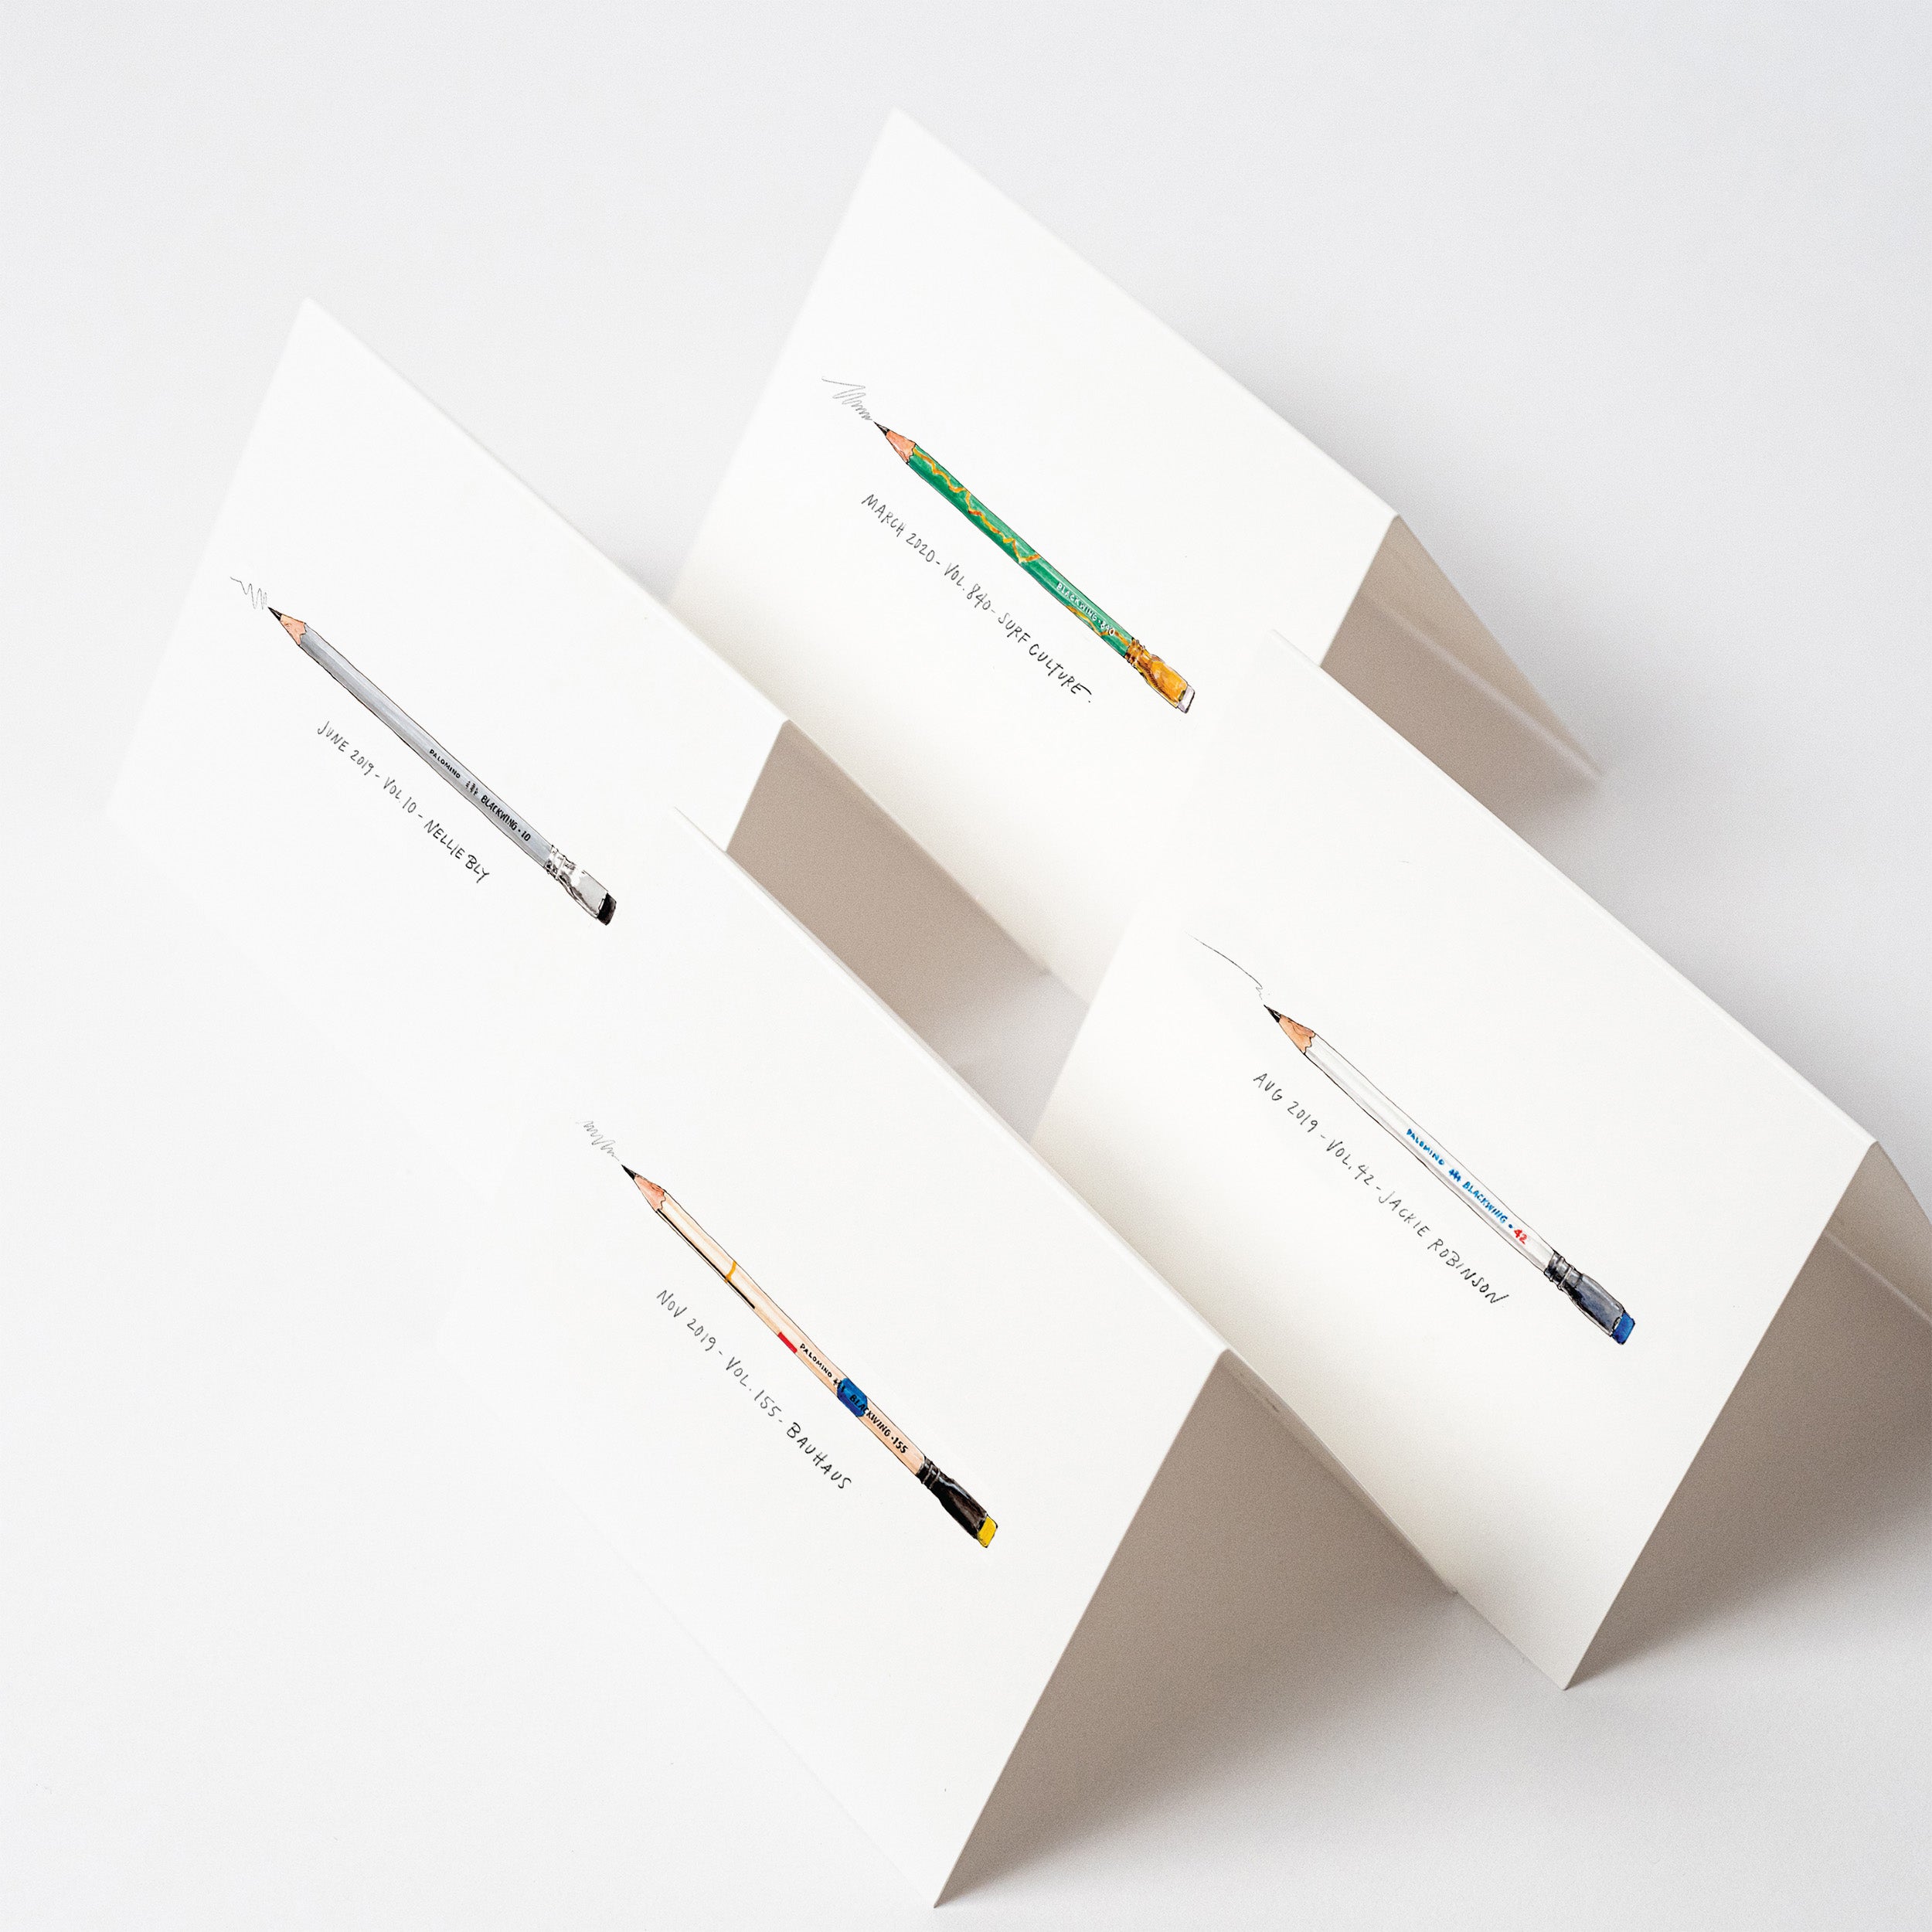 Four limited edition Blackwing Volumes Notecards with pencils on them designed by Blackwing Maker.